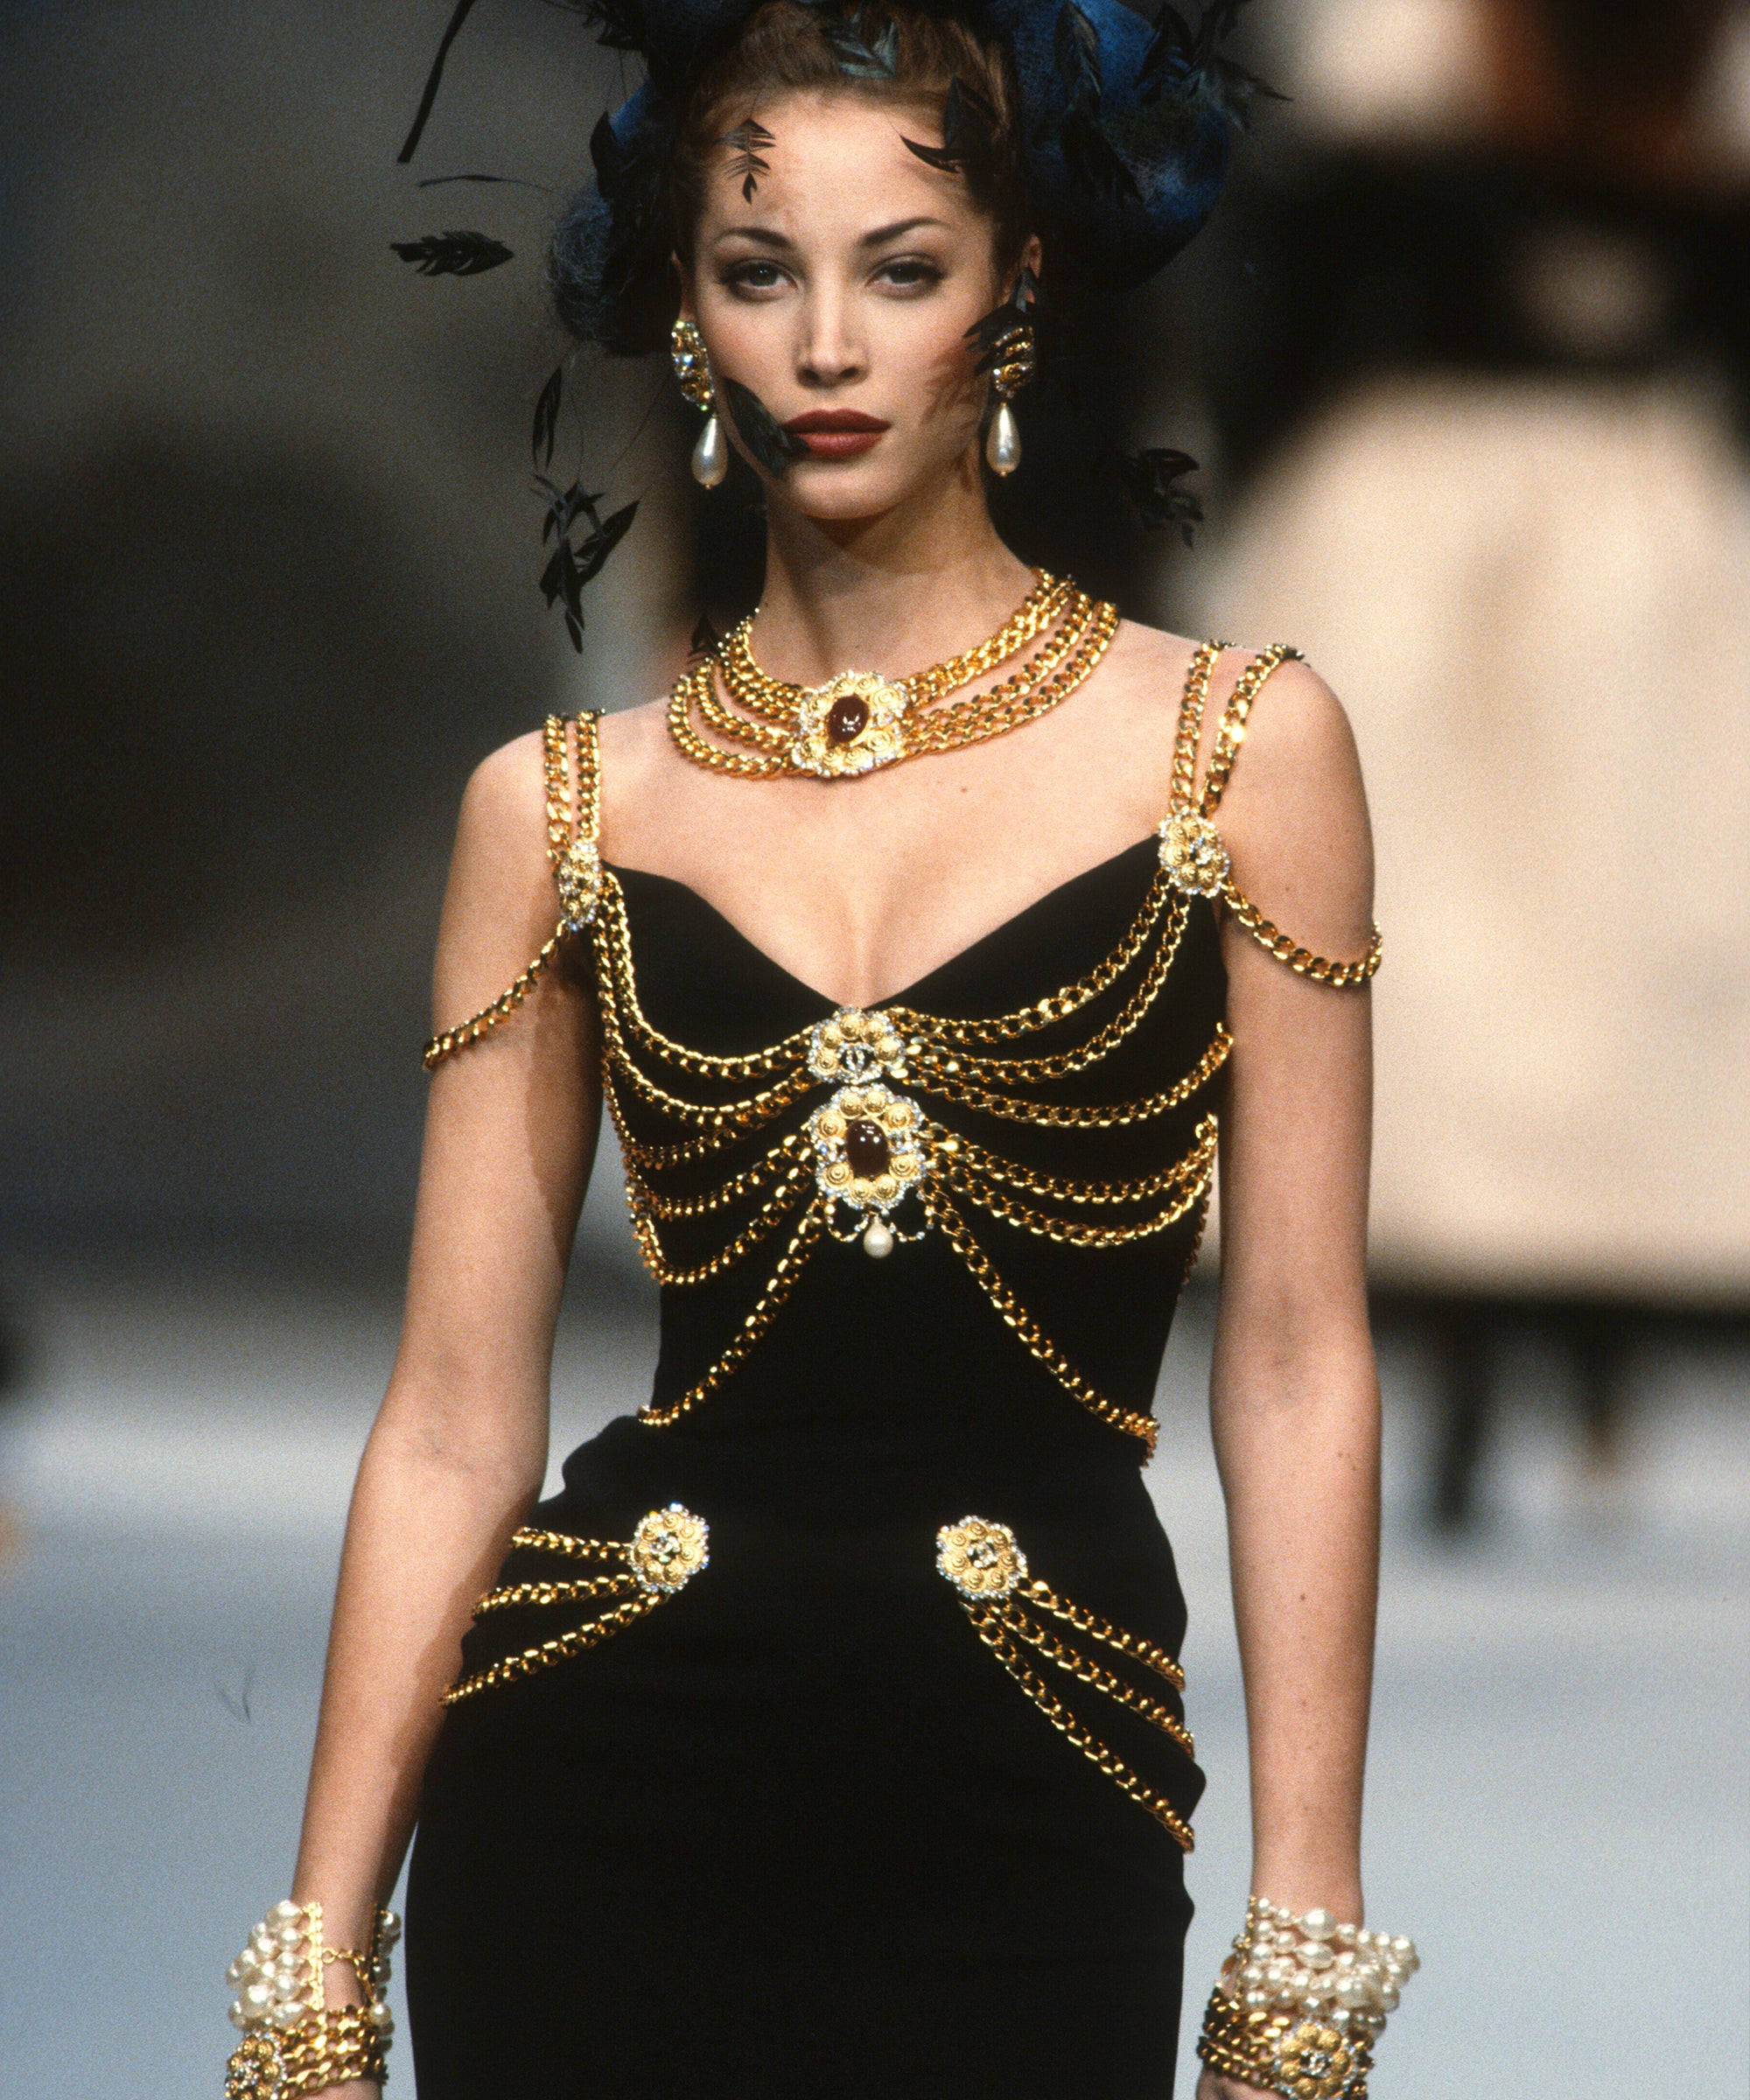 Eight throwback moments from Chanel's runway archive